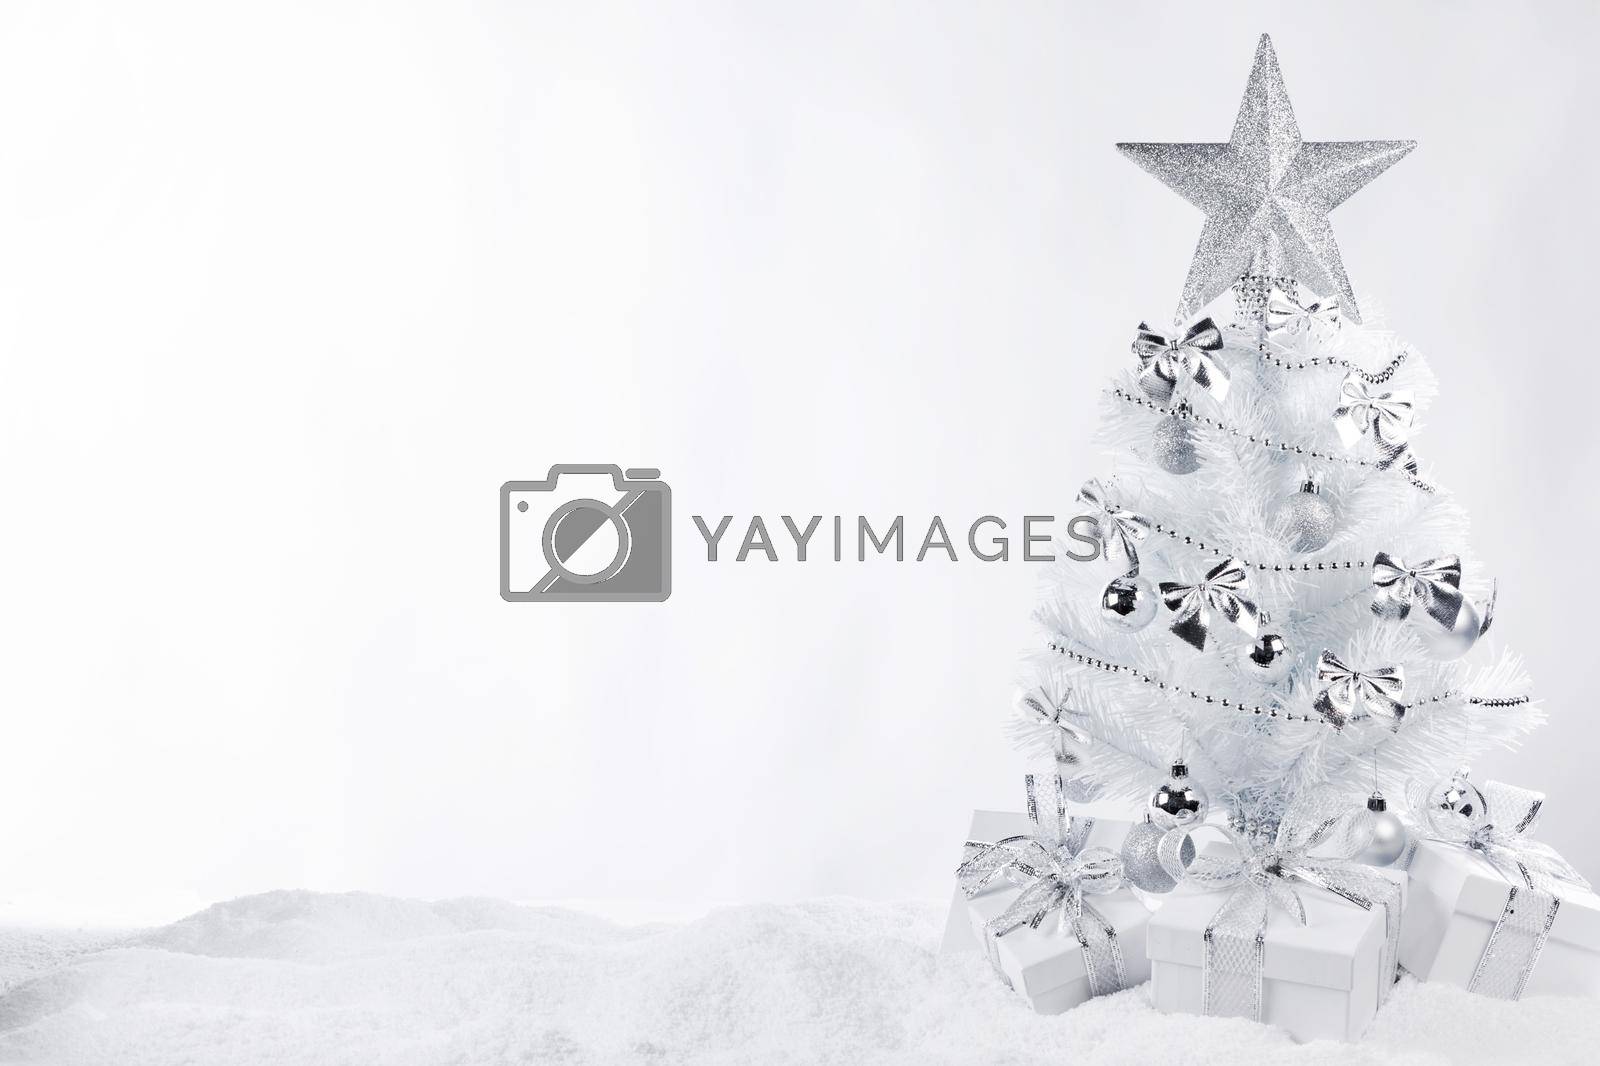 Royalty free image of White ornate Christmas tree by Yellowj